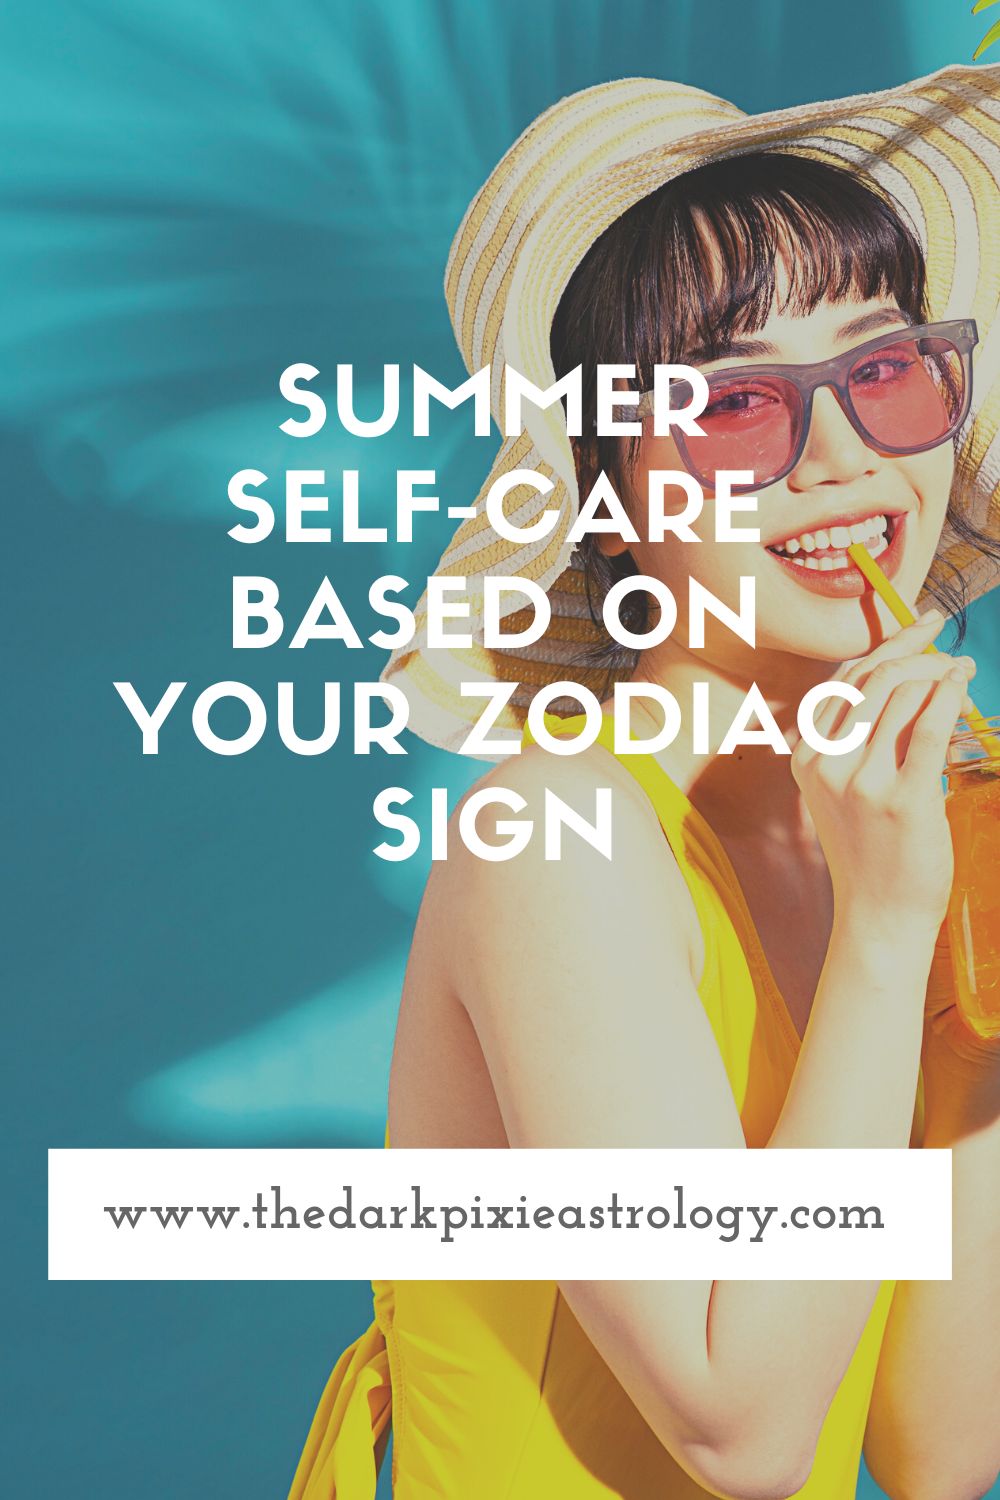 Summer Self-Care Based on Your Zodiac Sign - The Dark Pixie Astrology